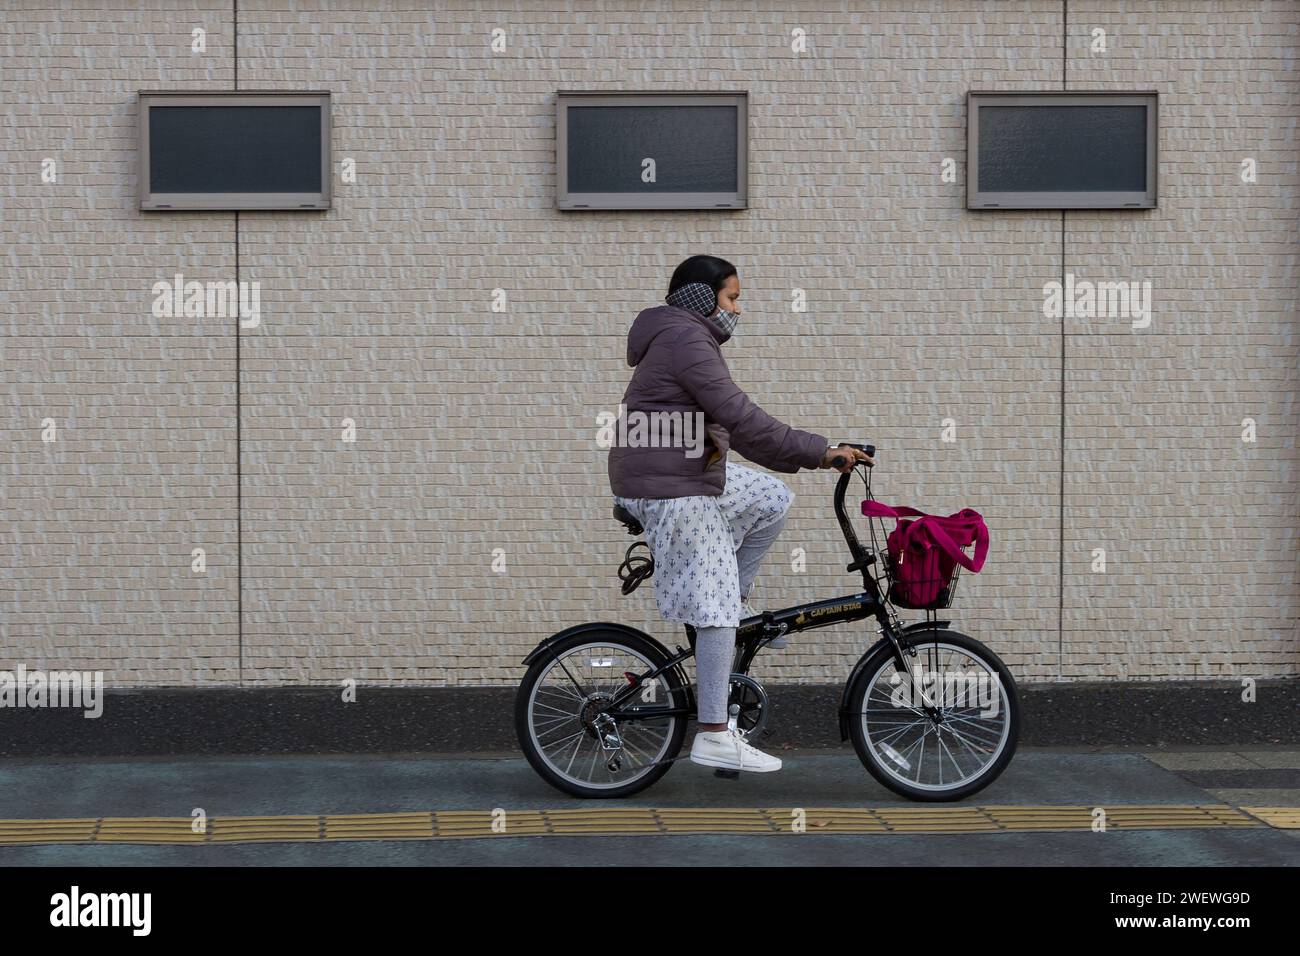 A south Asian woman, wearing warm clothes, rides her bicycle on the street near Ebina, Kanagawa, Japan. Stock Photo